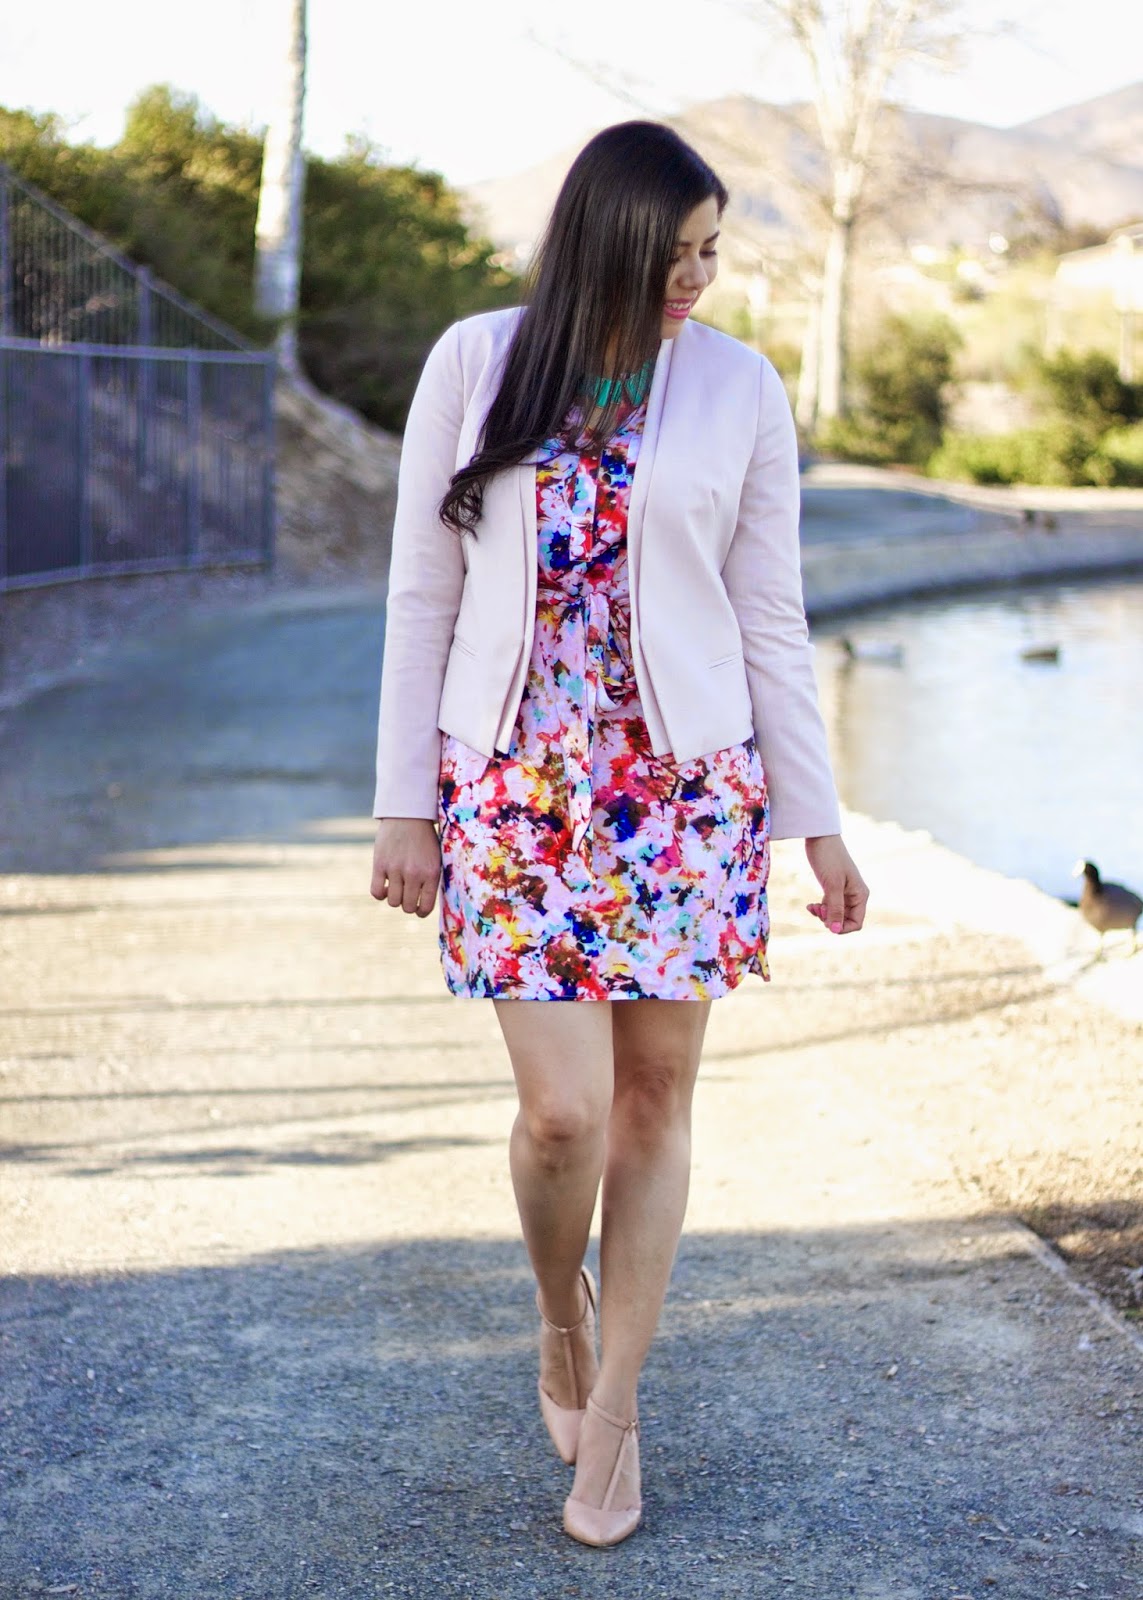 Sleeve floral print dress, pops of teal, pop of color in an outfit, perfect outfit for spring